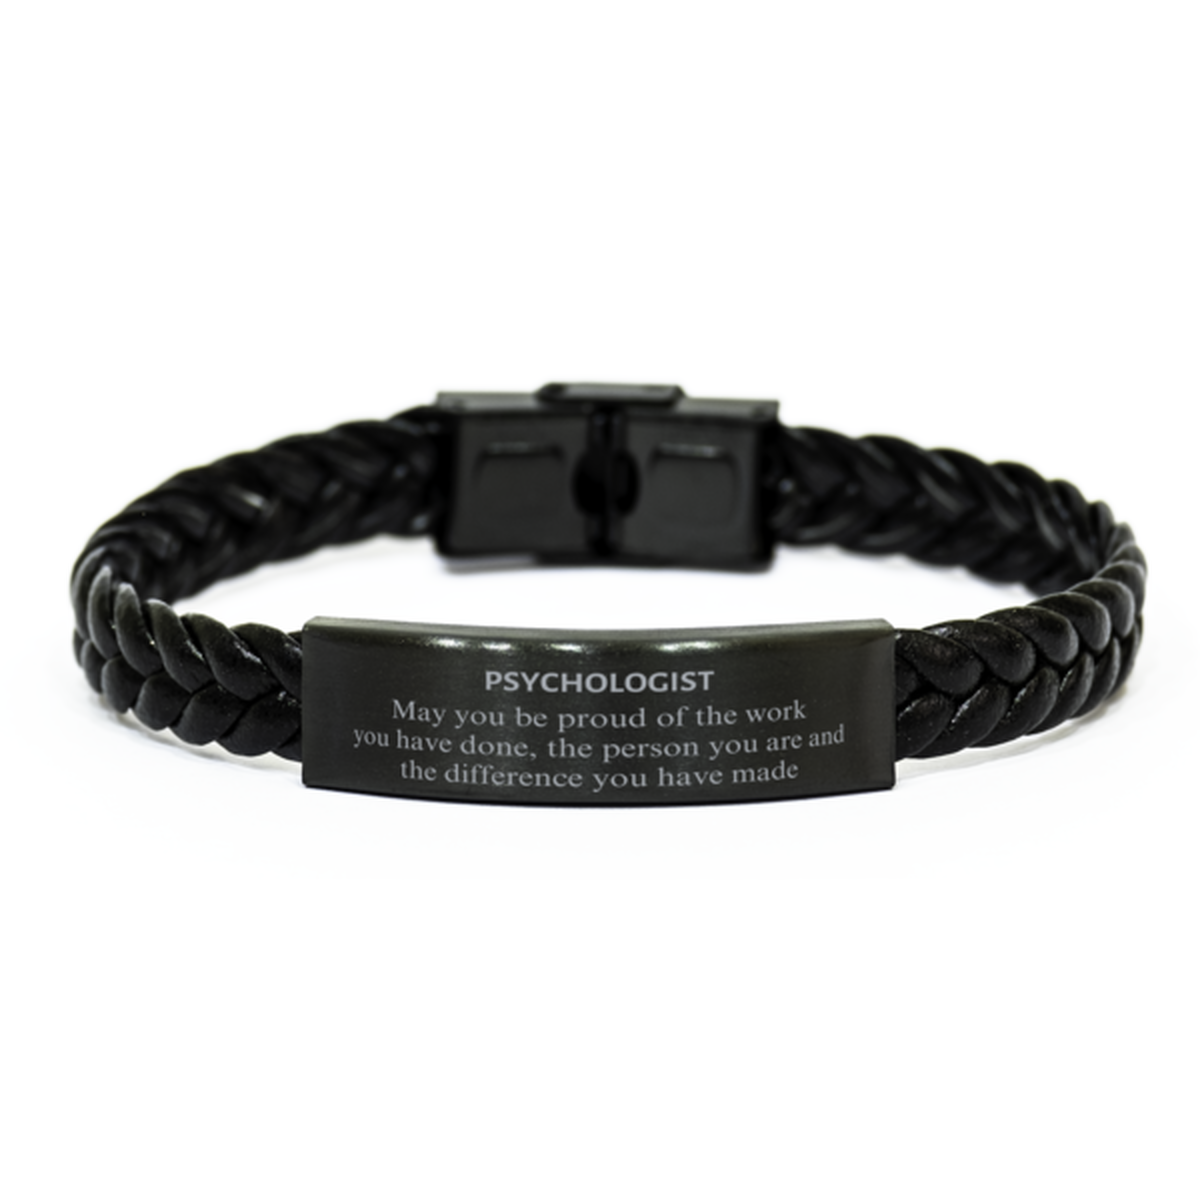 Psychologist May you be proud of the work you have done, Retirement Psychologist Braided Leather Bracelet for Colleague Appreciation Gifts Amazing for Psychologist